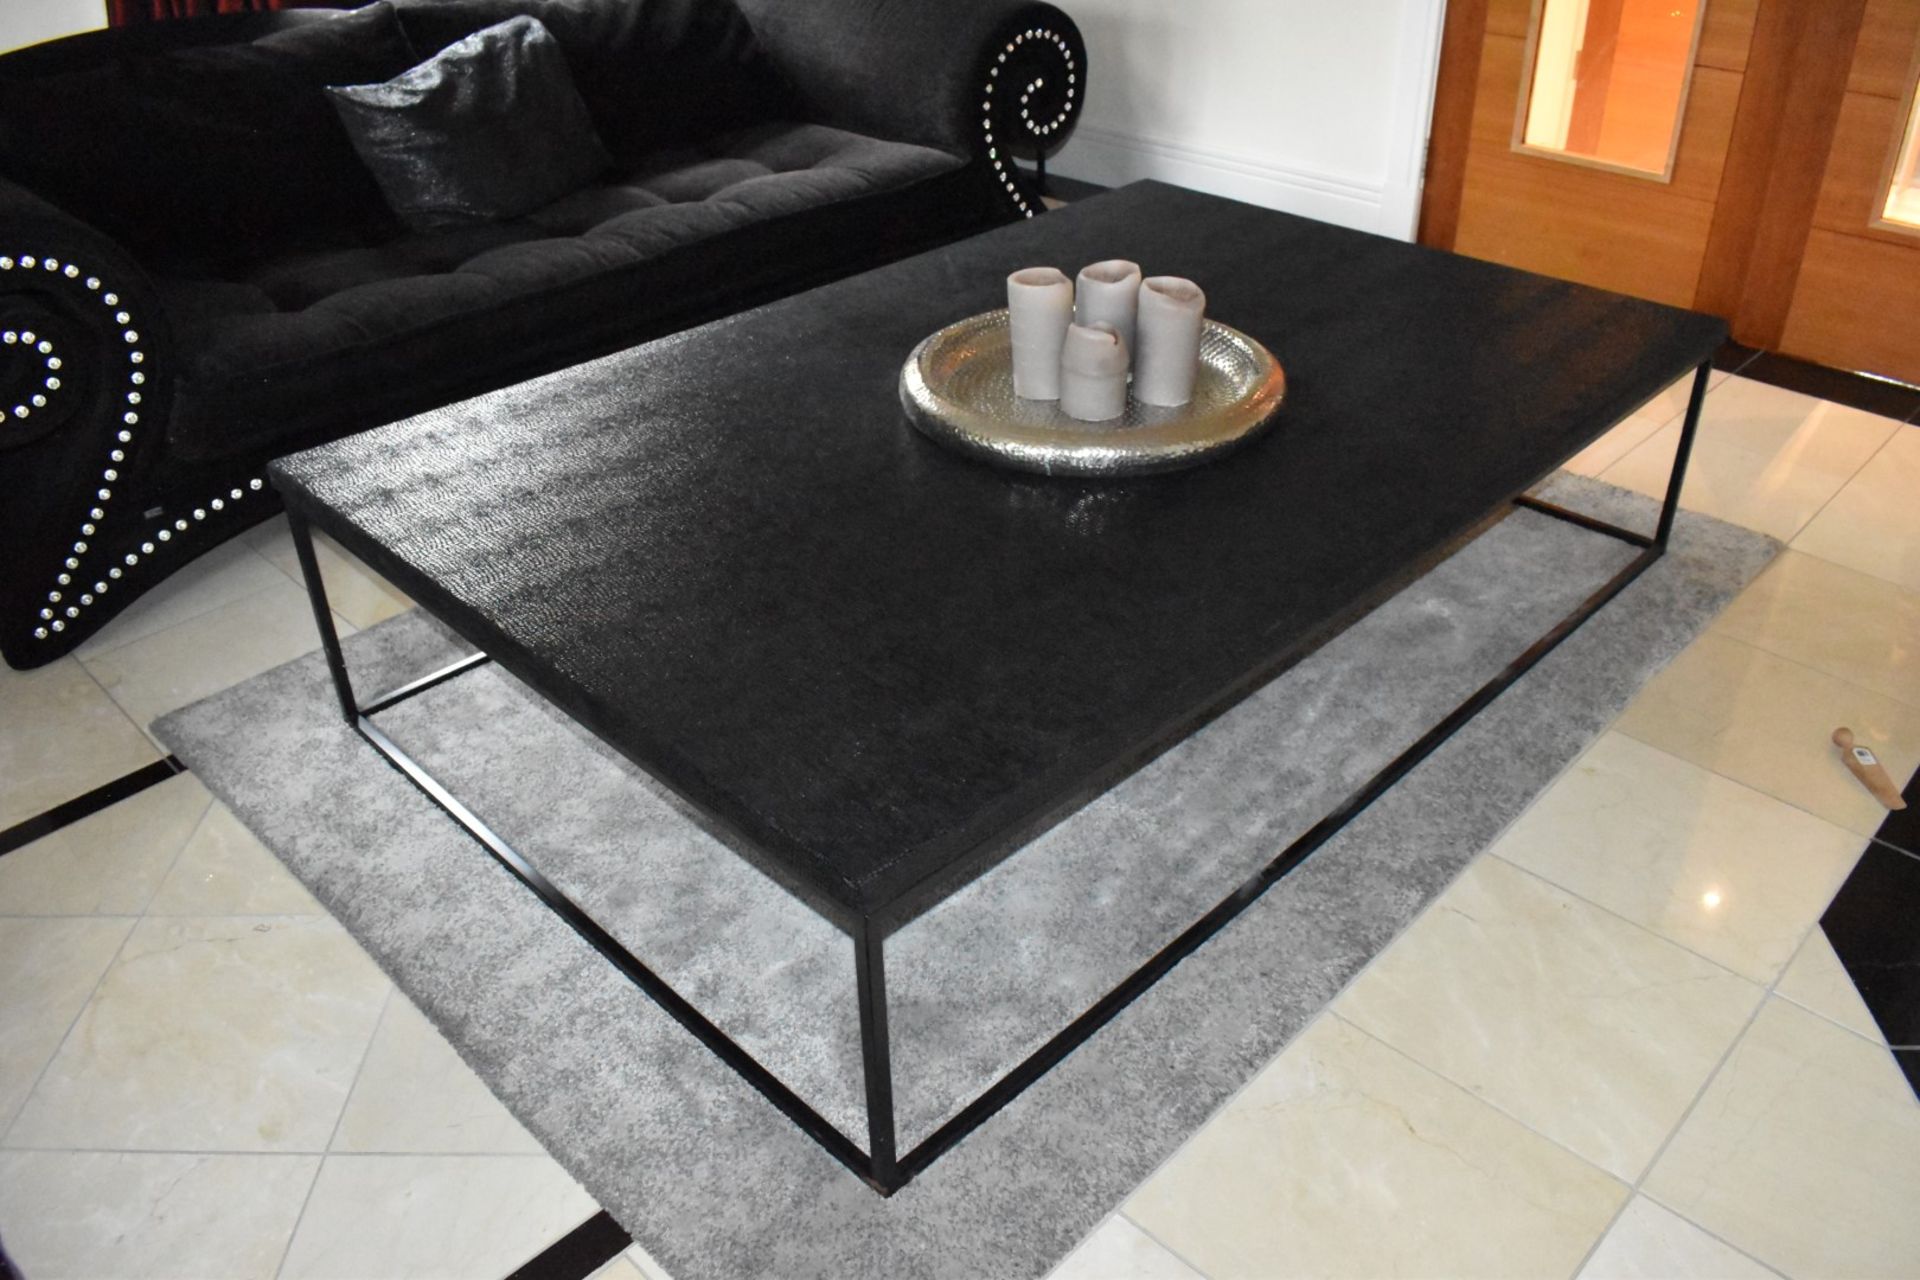 1 x Designer Guadarte Coffee Table With Faux Crocodile Skin Leather Finish - Large Size H45 x W200 x - Image 5 of 10